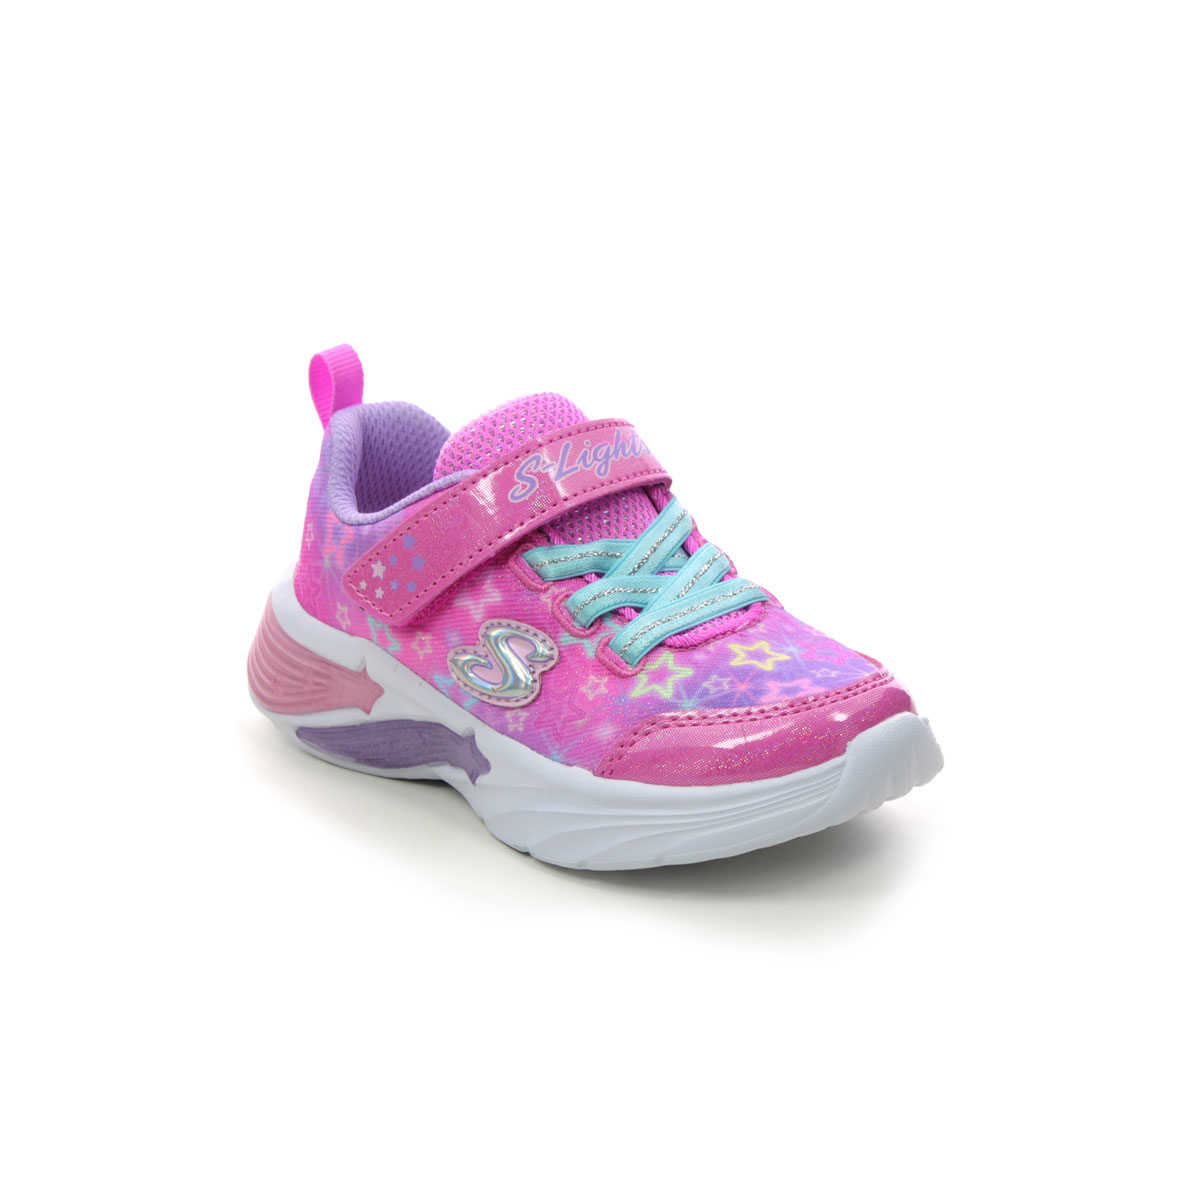 Skechers Star Sparks Inf Pink Kids Girls Trainers 302324N In Size 23 In Plain Pink